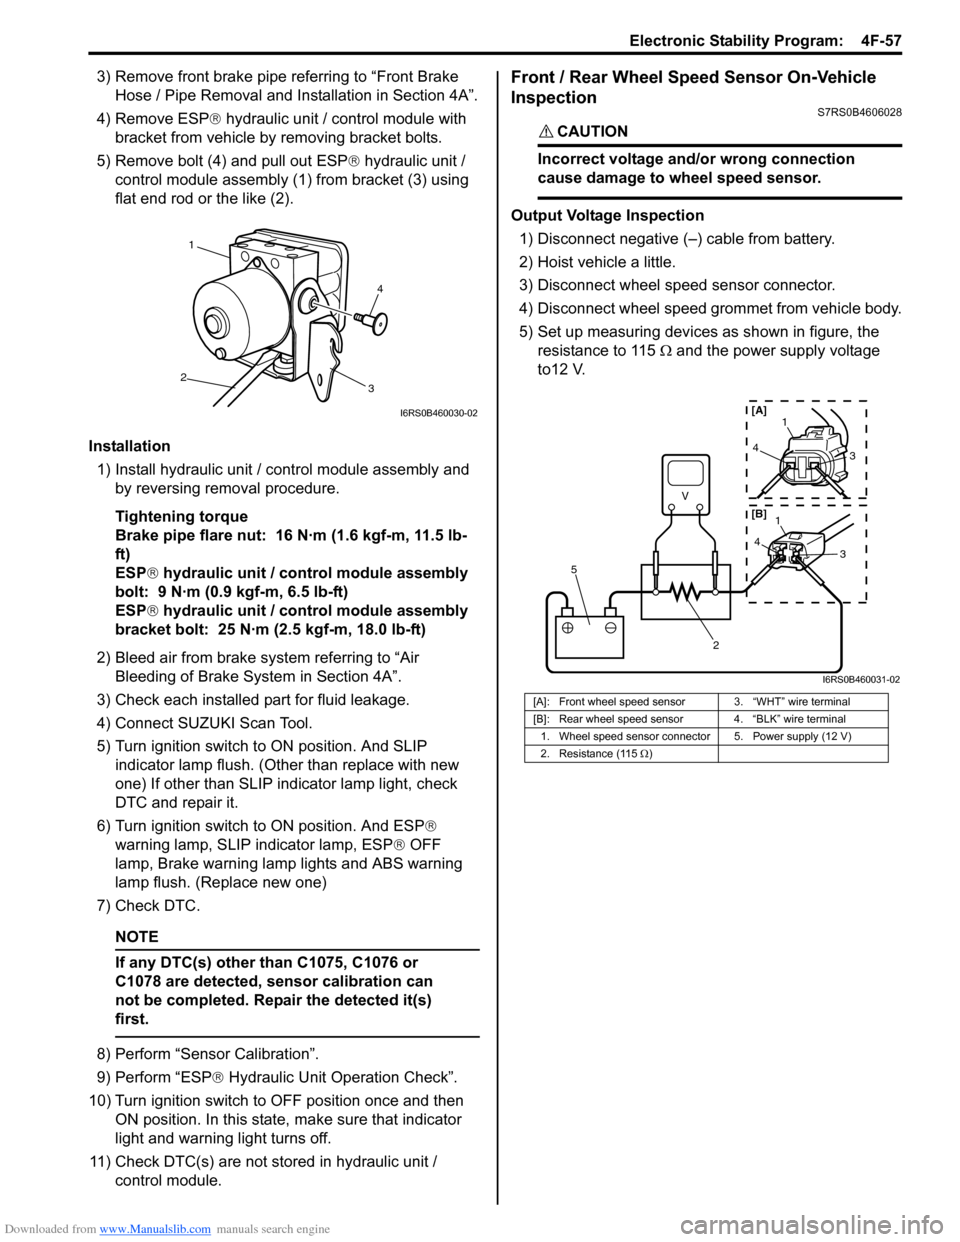 SUZUKI SWIFT 2006 2.G Service Workshop Manual Downloaded from www.Manualslib.com manuals search engine Electronic Stability Program:  4F-57
3) Remove front brake pipe referring to “Front Brake Hose / Pipe Removal and In stallation in Section 4A